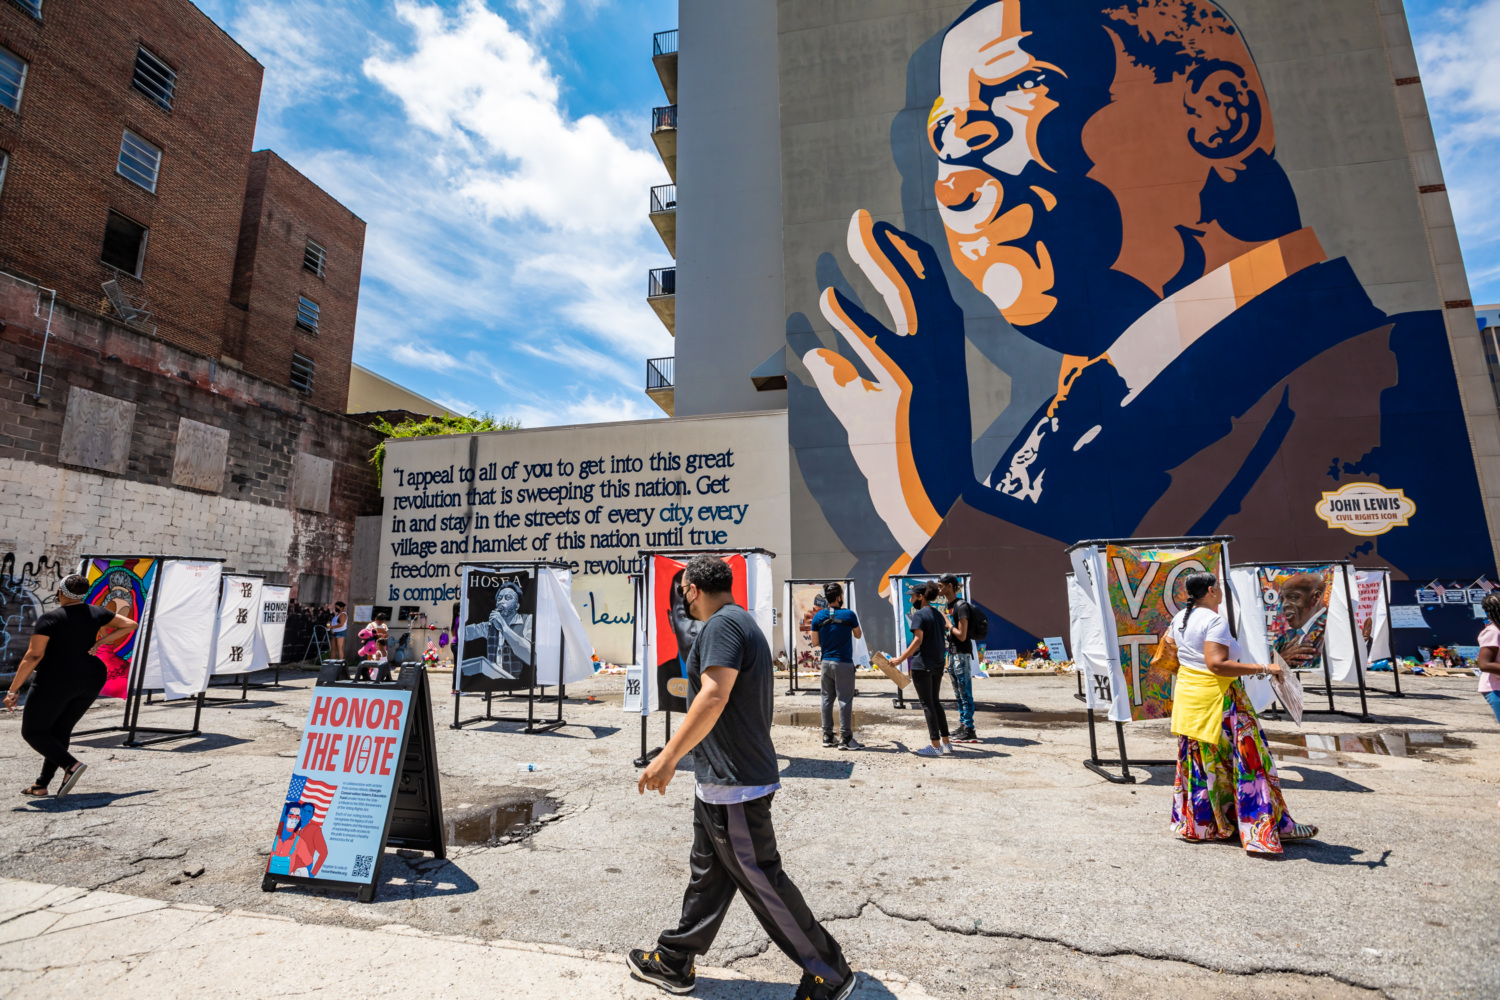 Photo of an art activation featuring voting booths each with a different mural painted onto it highlighting voting rights issues and civil rights icons. In the background there is a large mural of John Lewis.